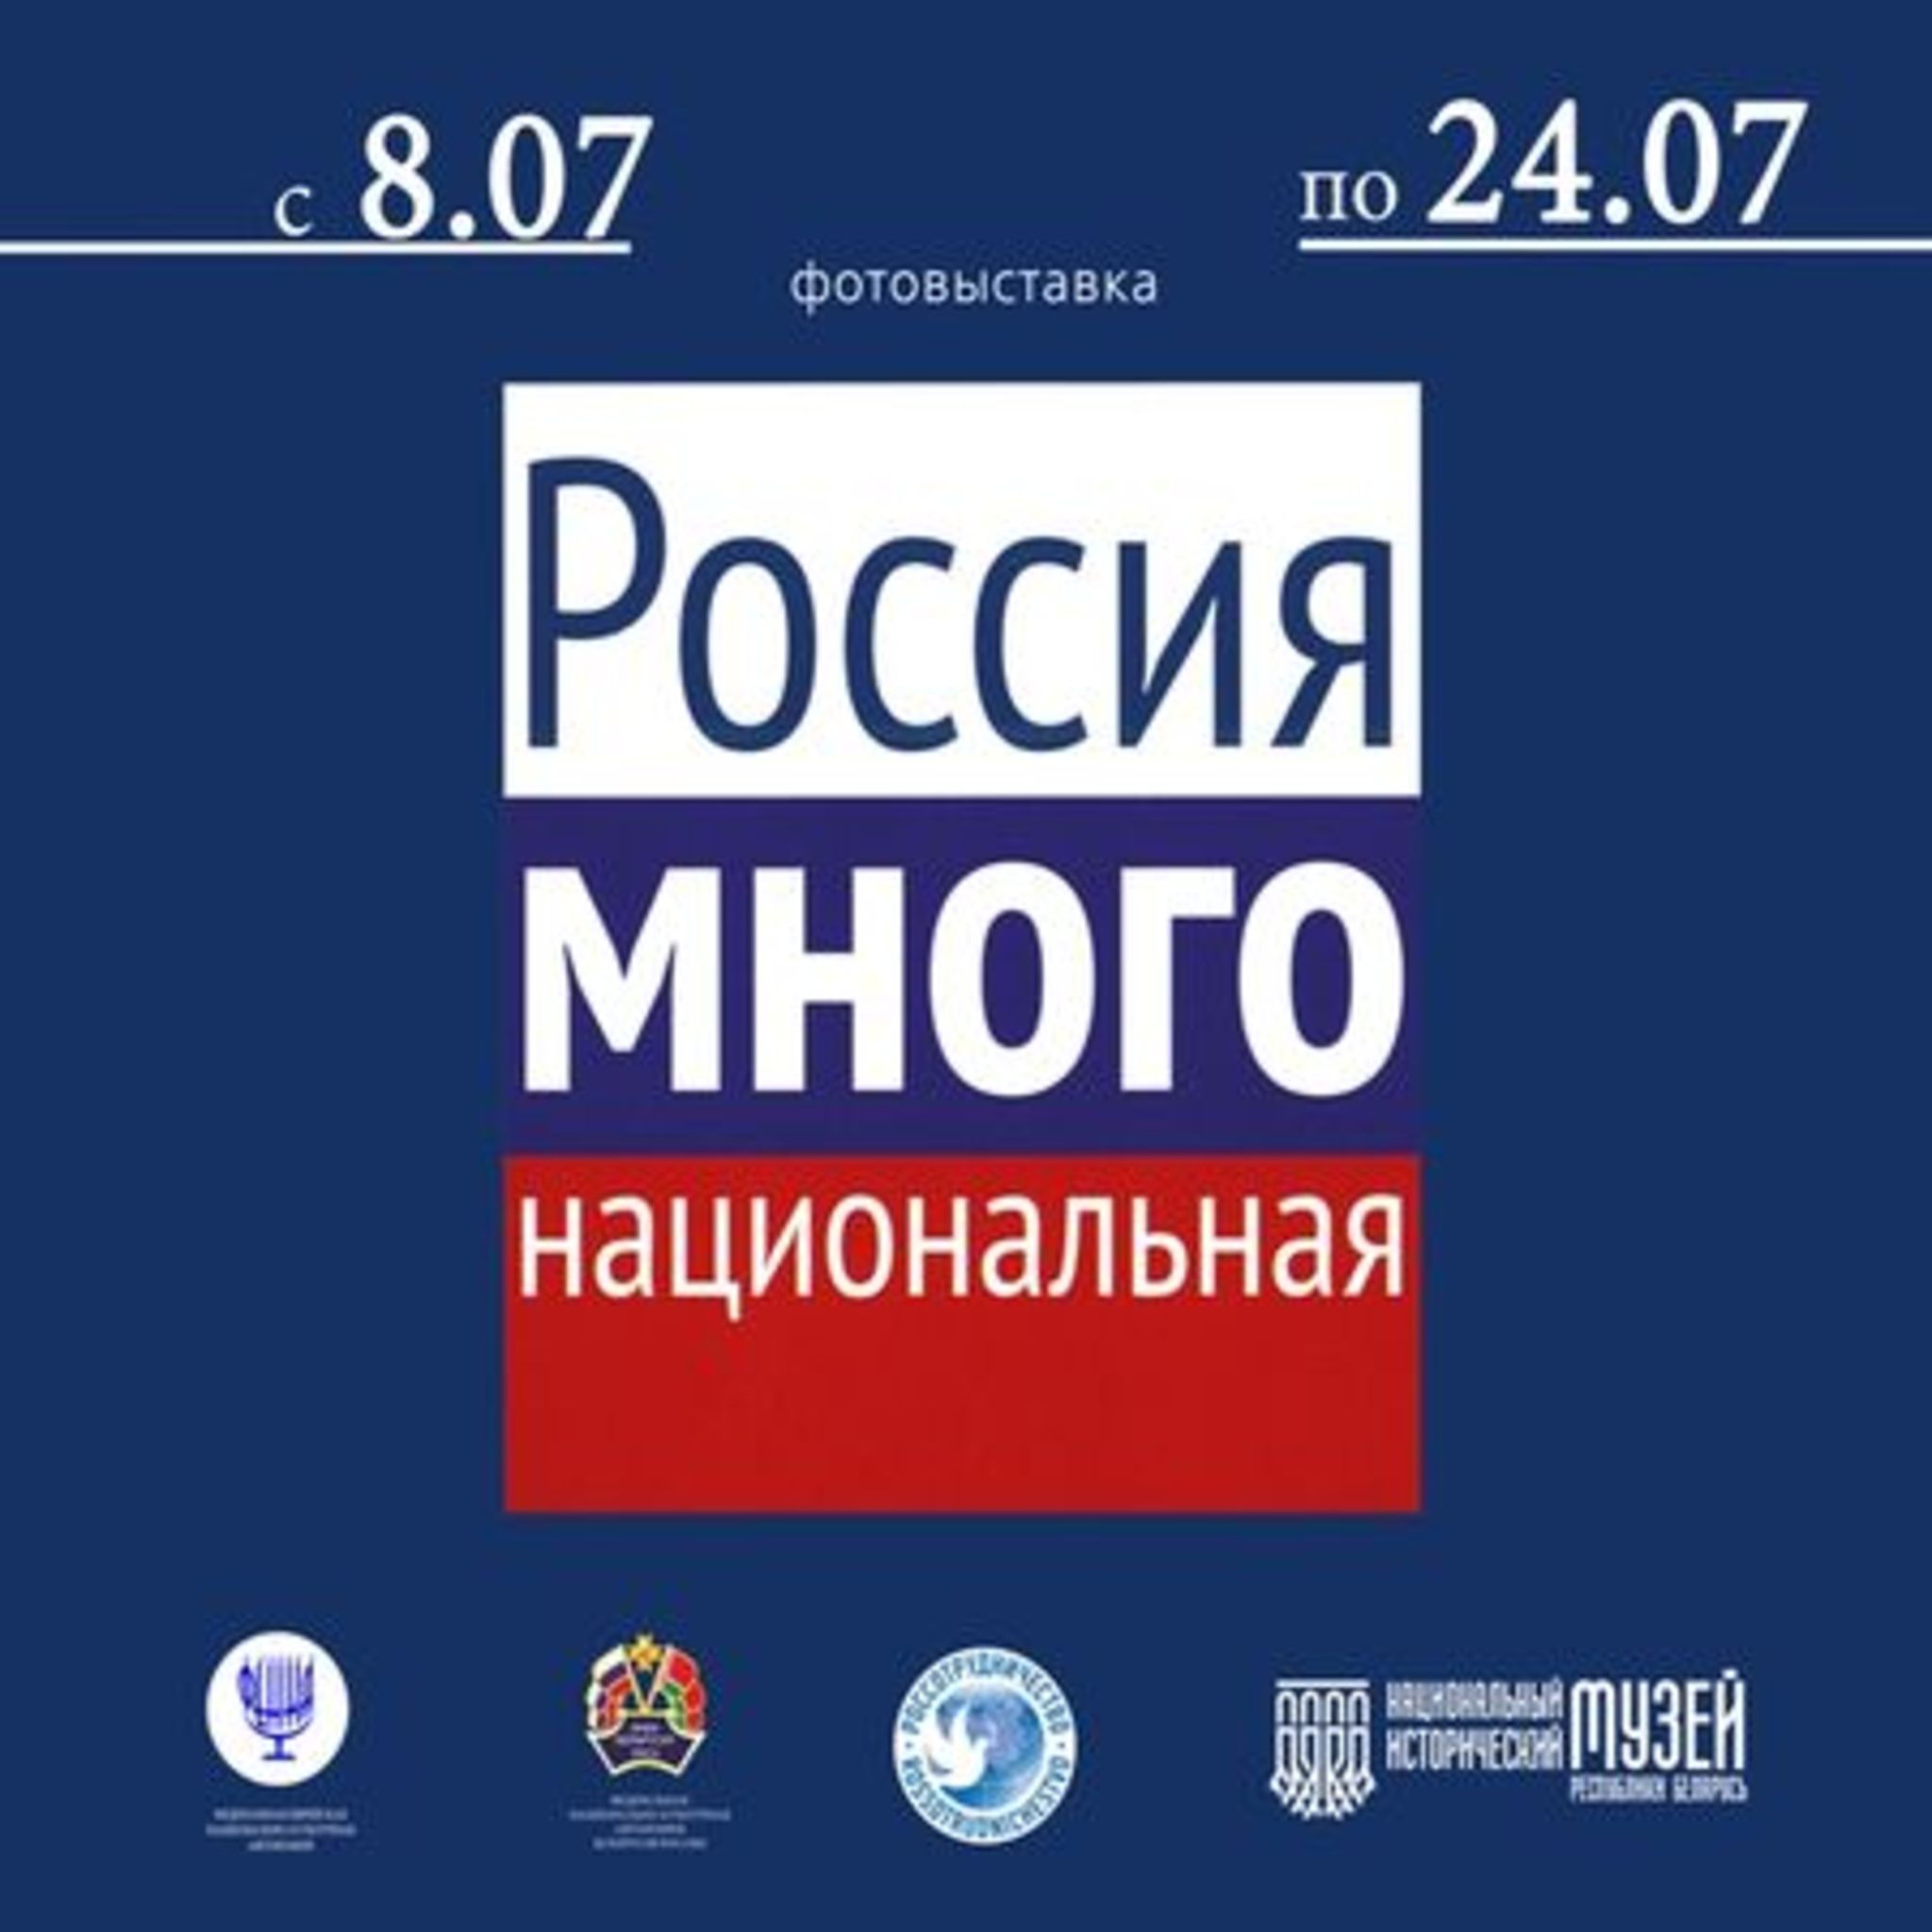 Photo exhibition of Russian multinational